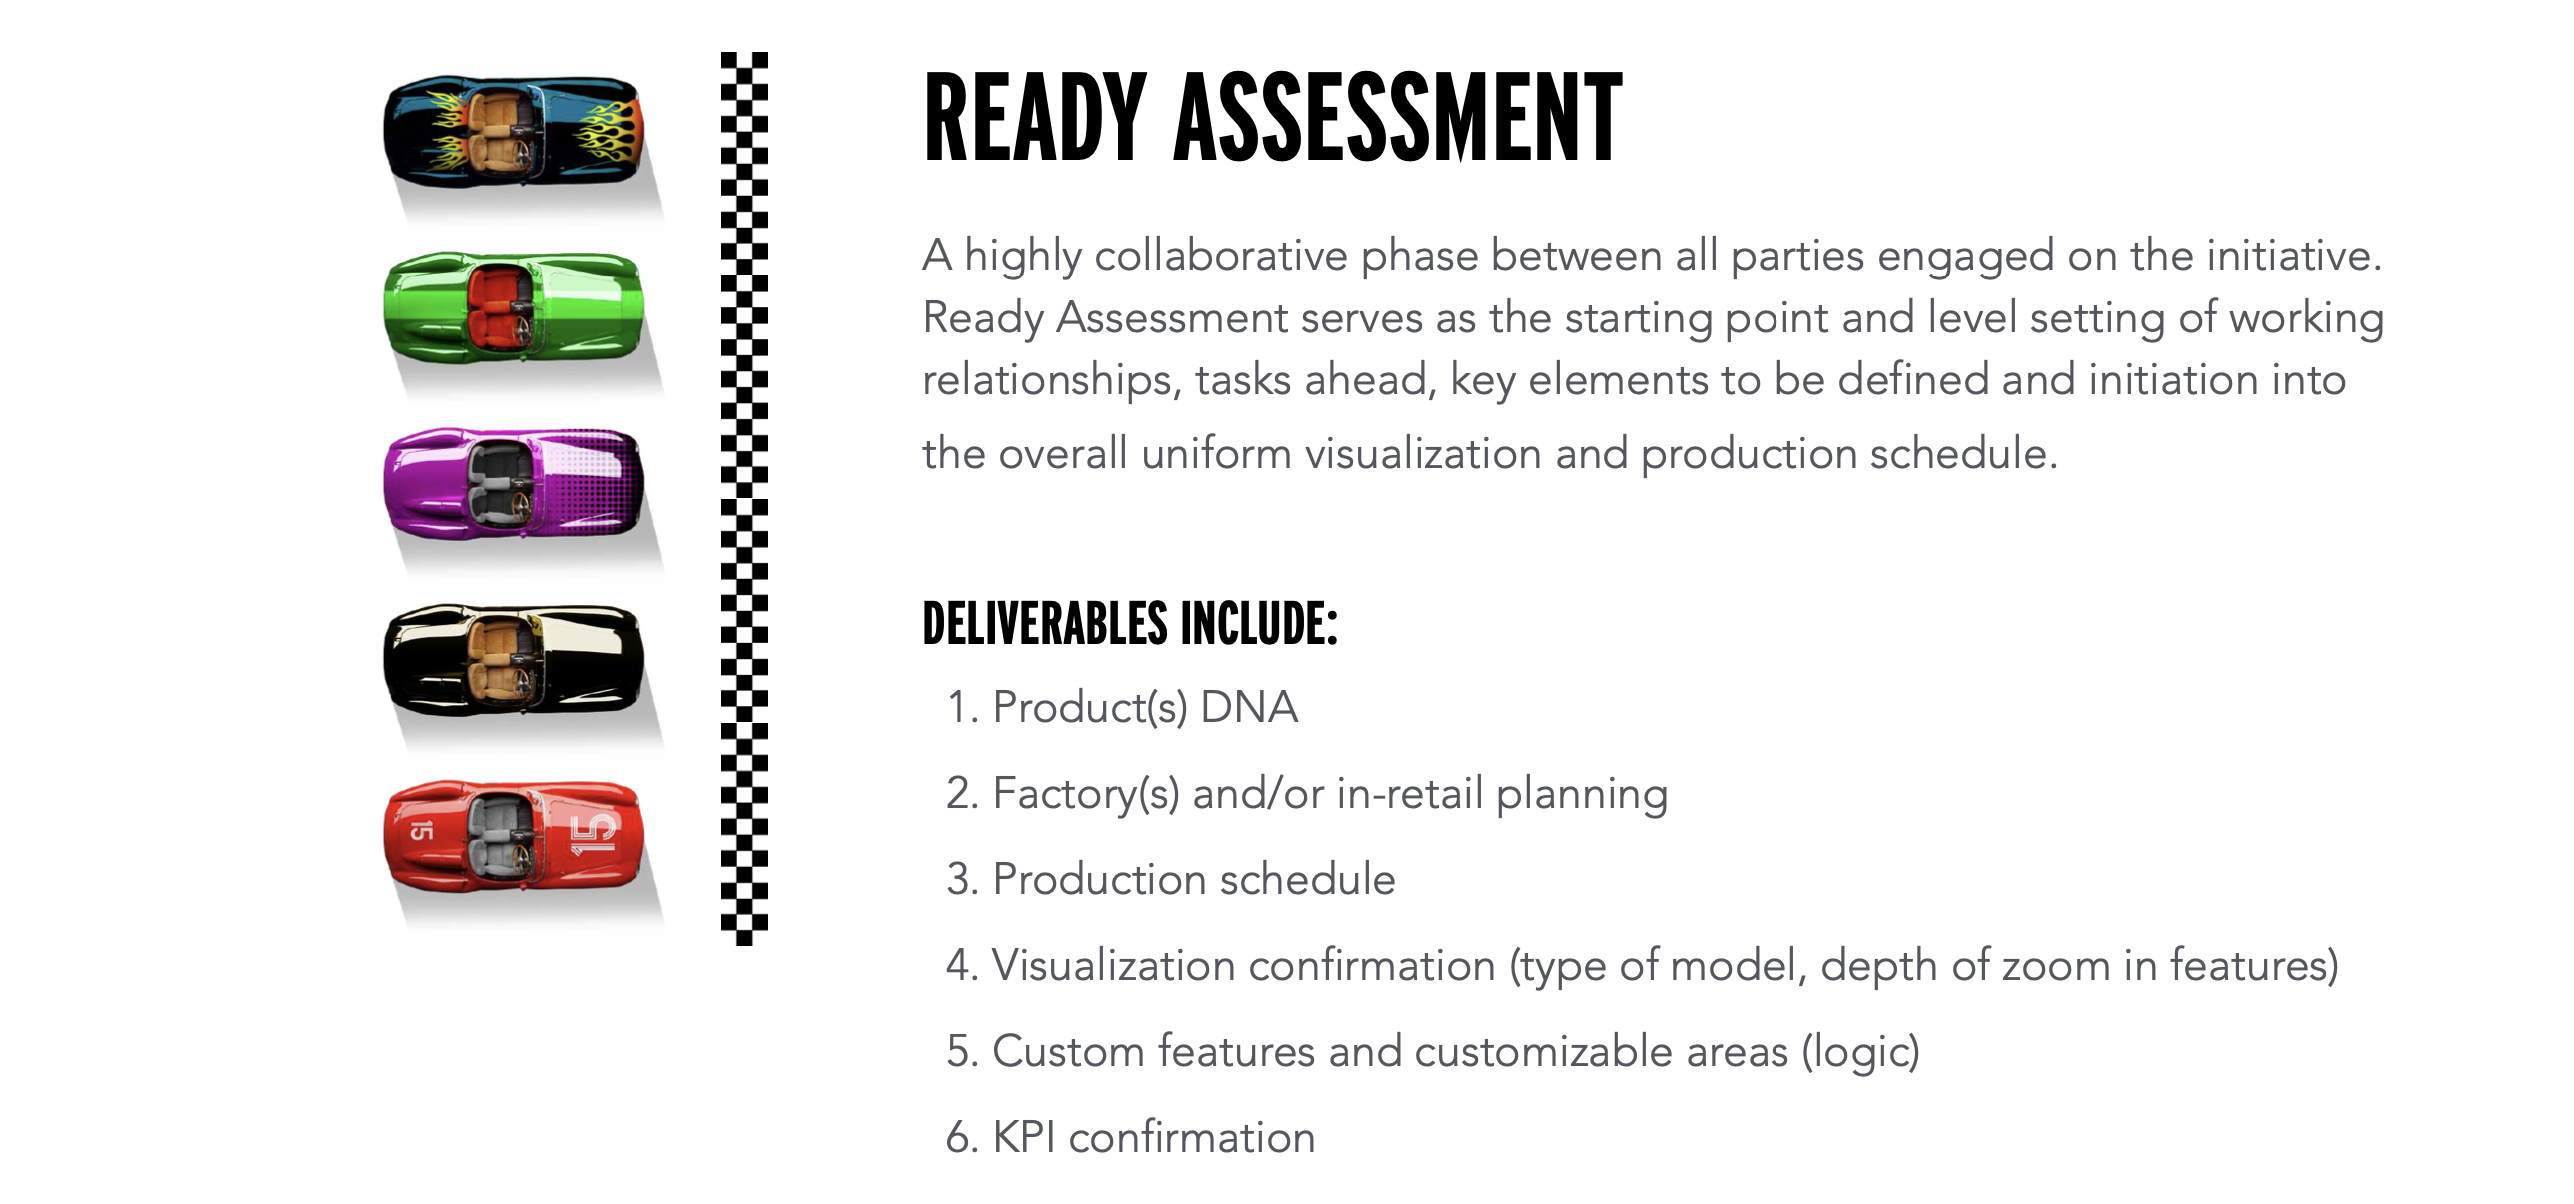 READY ASSESSMENT A highly collaborative phase between all parties engaged on the initiative. Ready Assessment serves as the starting point and level setting of working relationships, tasks ahead, key elements to be defined and initiation into the overall uniform visualization and production schedule. DELIVERABLES INCLUDE: 1. Product(s) DNA 2. Factory(s) and/or in-retail planning 3. Production schedule 4. Visualization confirmation (type of model, depth of zoom in features) 5. Custom features and customizable areas (logic) 6. KPI confirmation